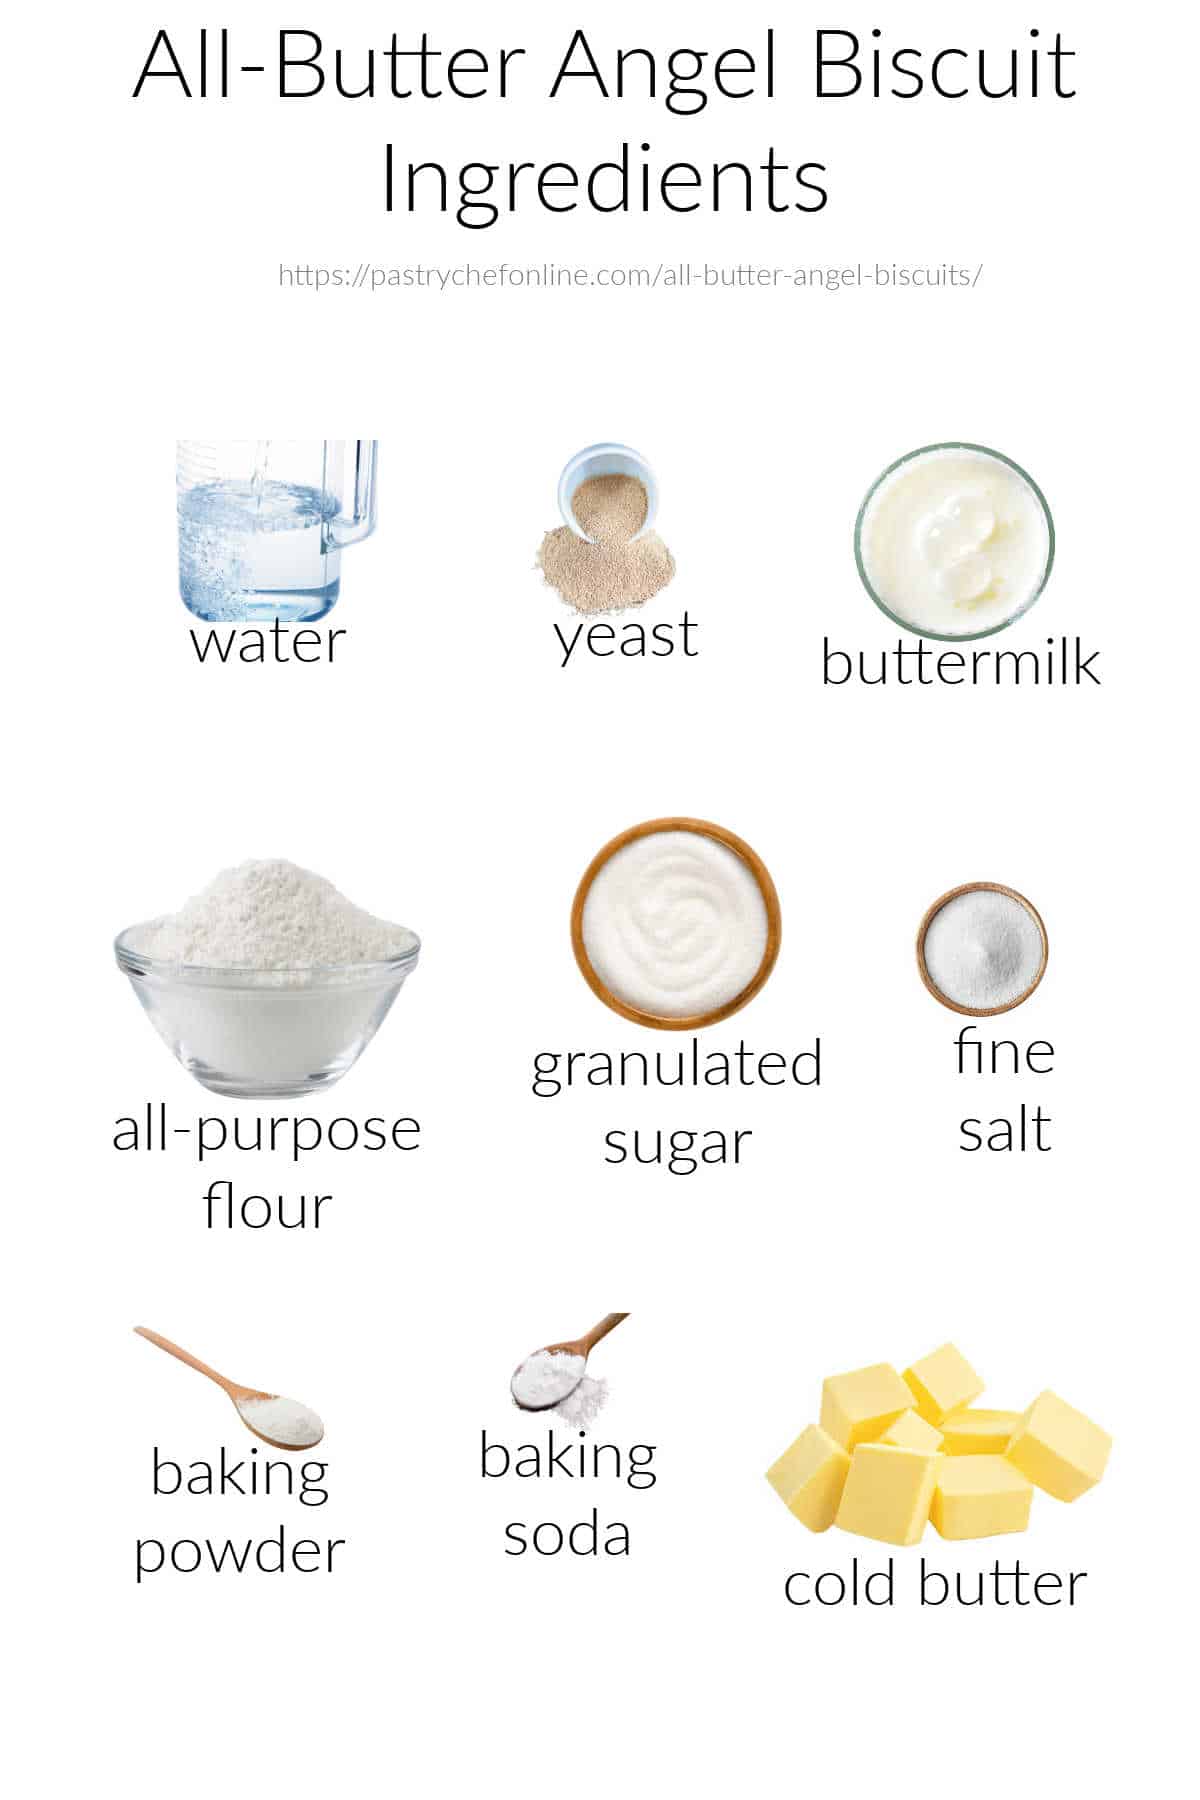 All the ingredients needed to make angel biscuits, labeled and photographed on a white background.